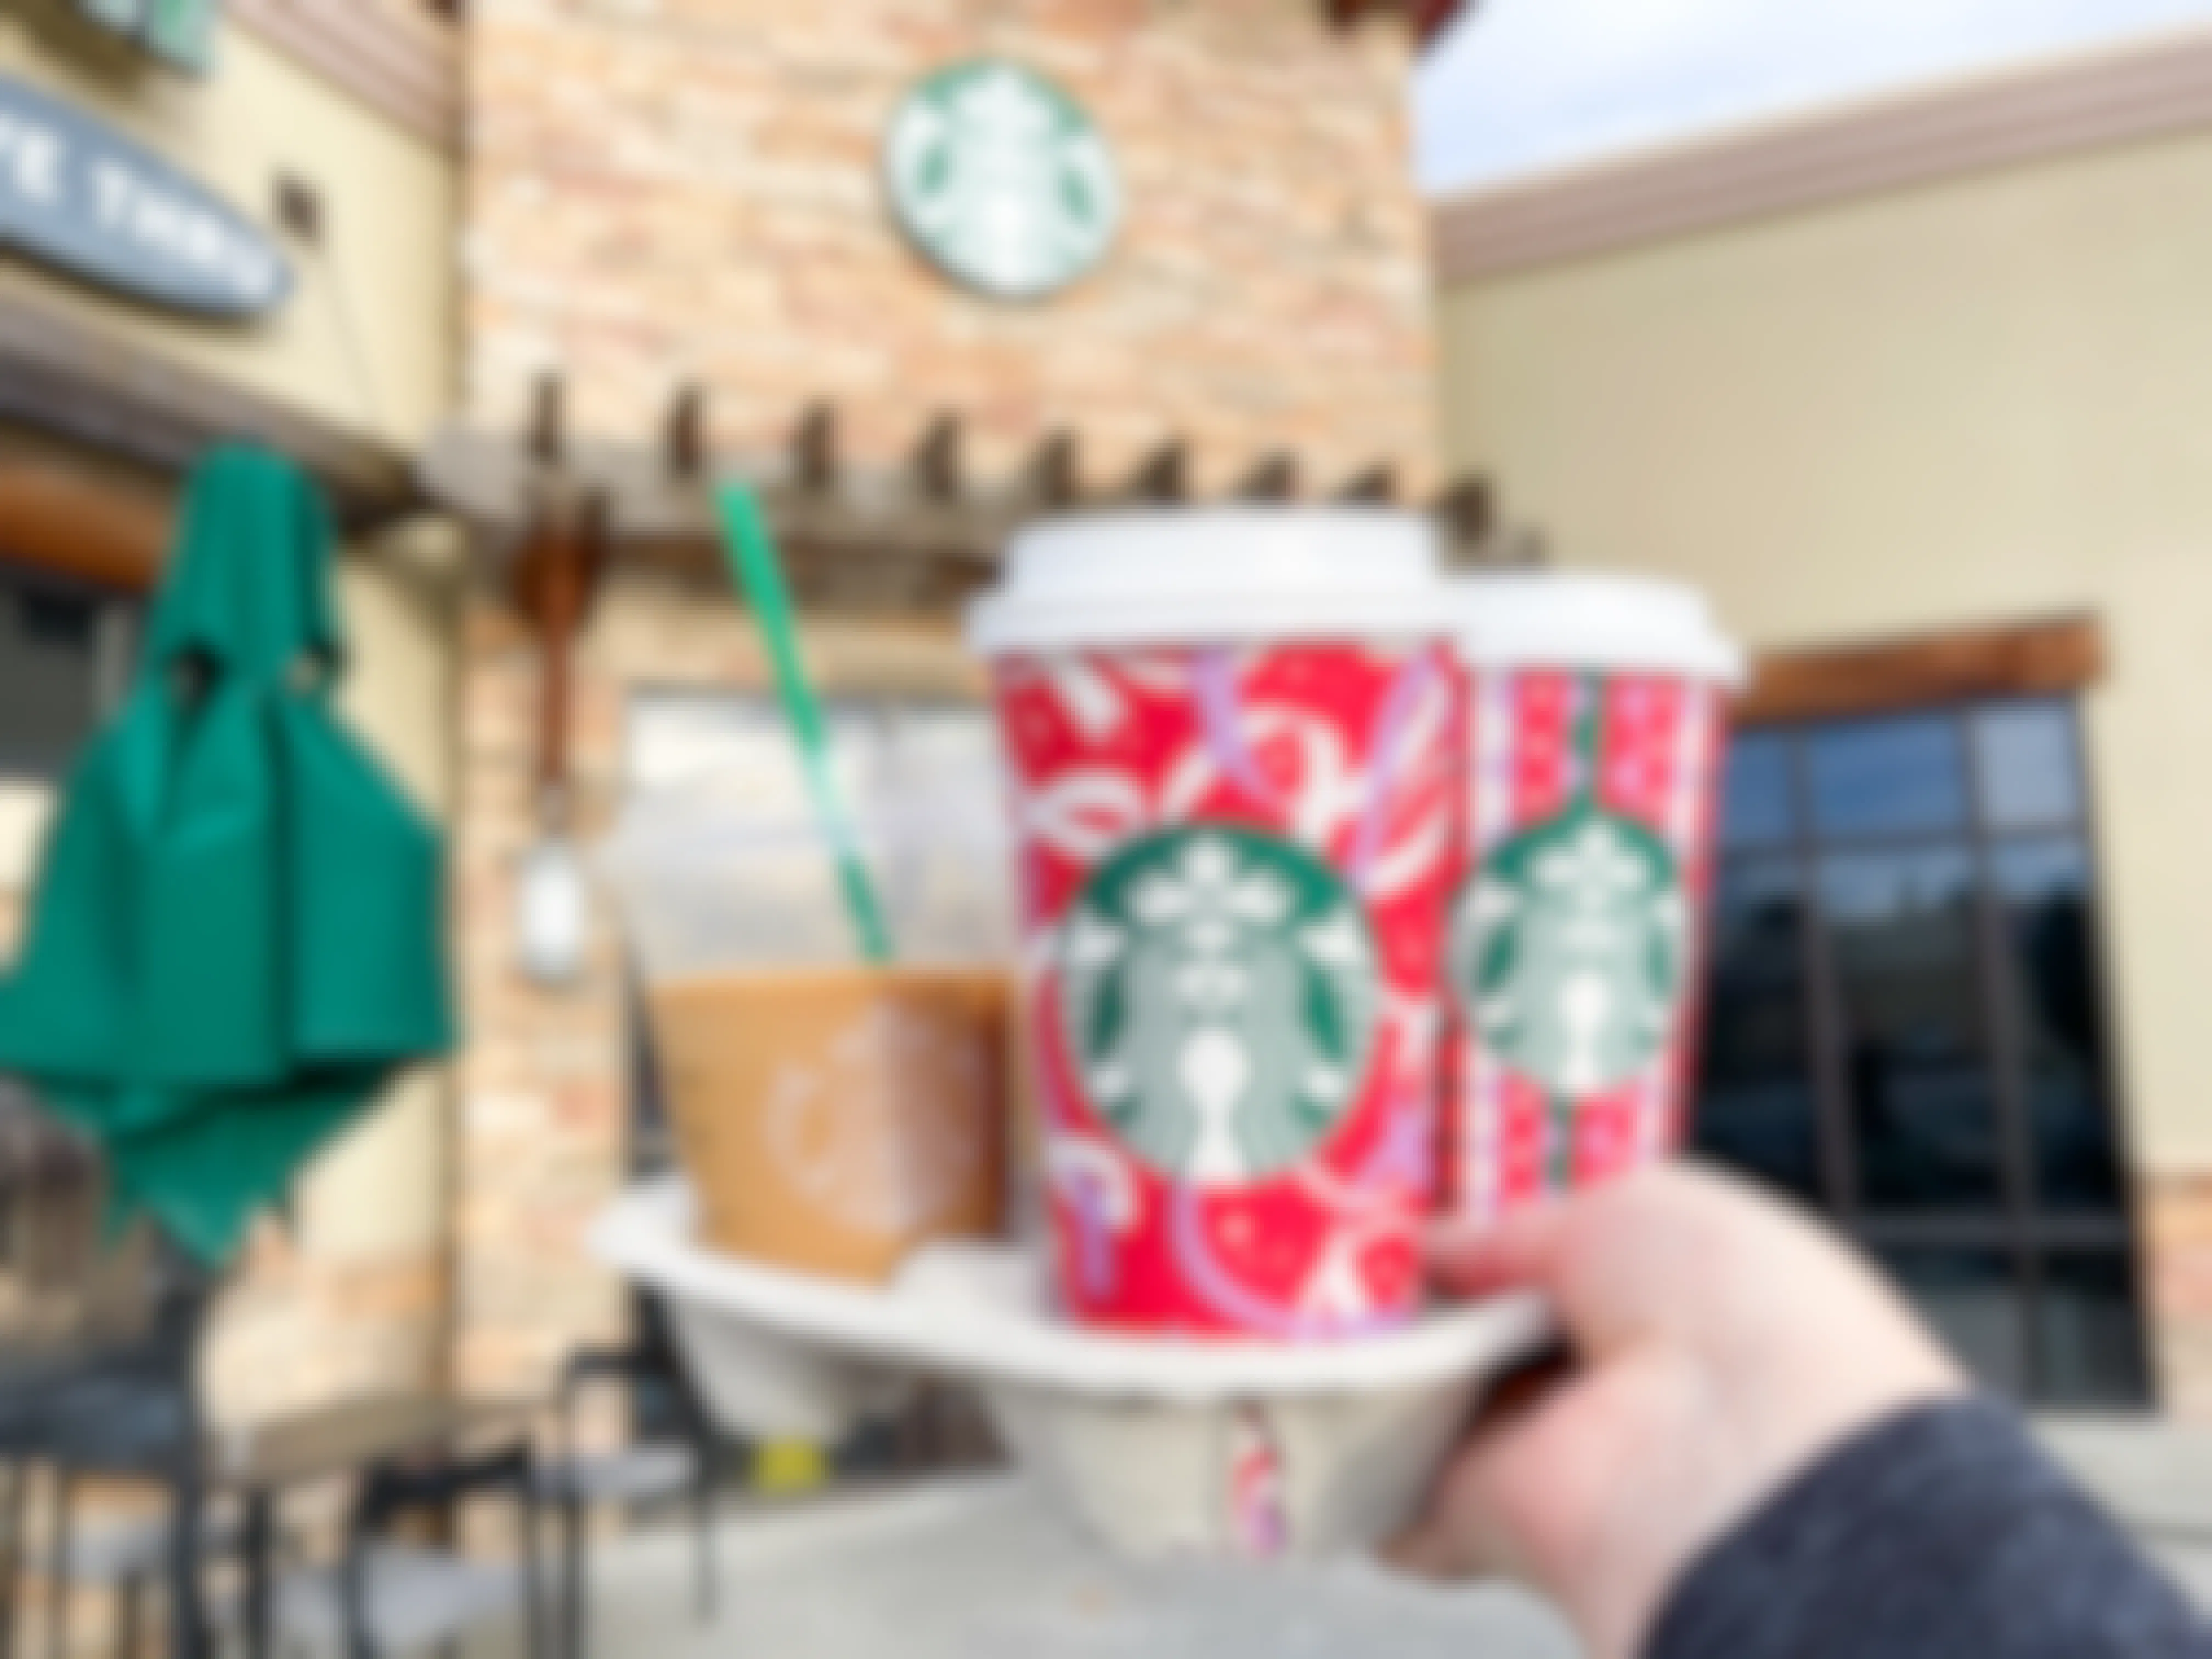 A person holding up a drink carrier holding some holiday drinks in front of a Starbucks. You can get these drinks on Christmas because Starbucks is open on Christmas.